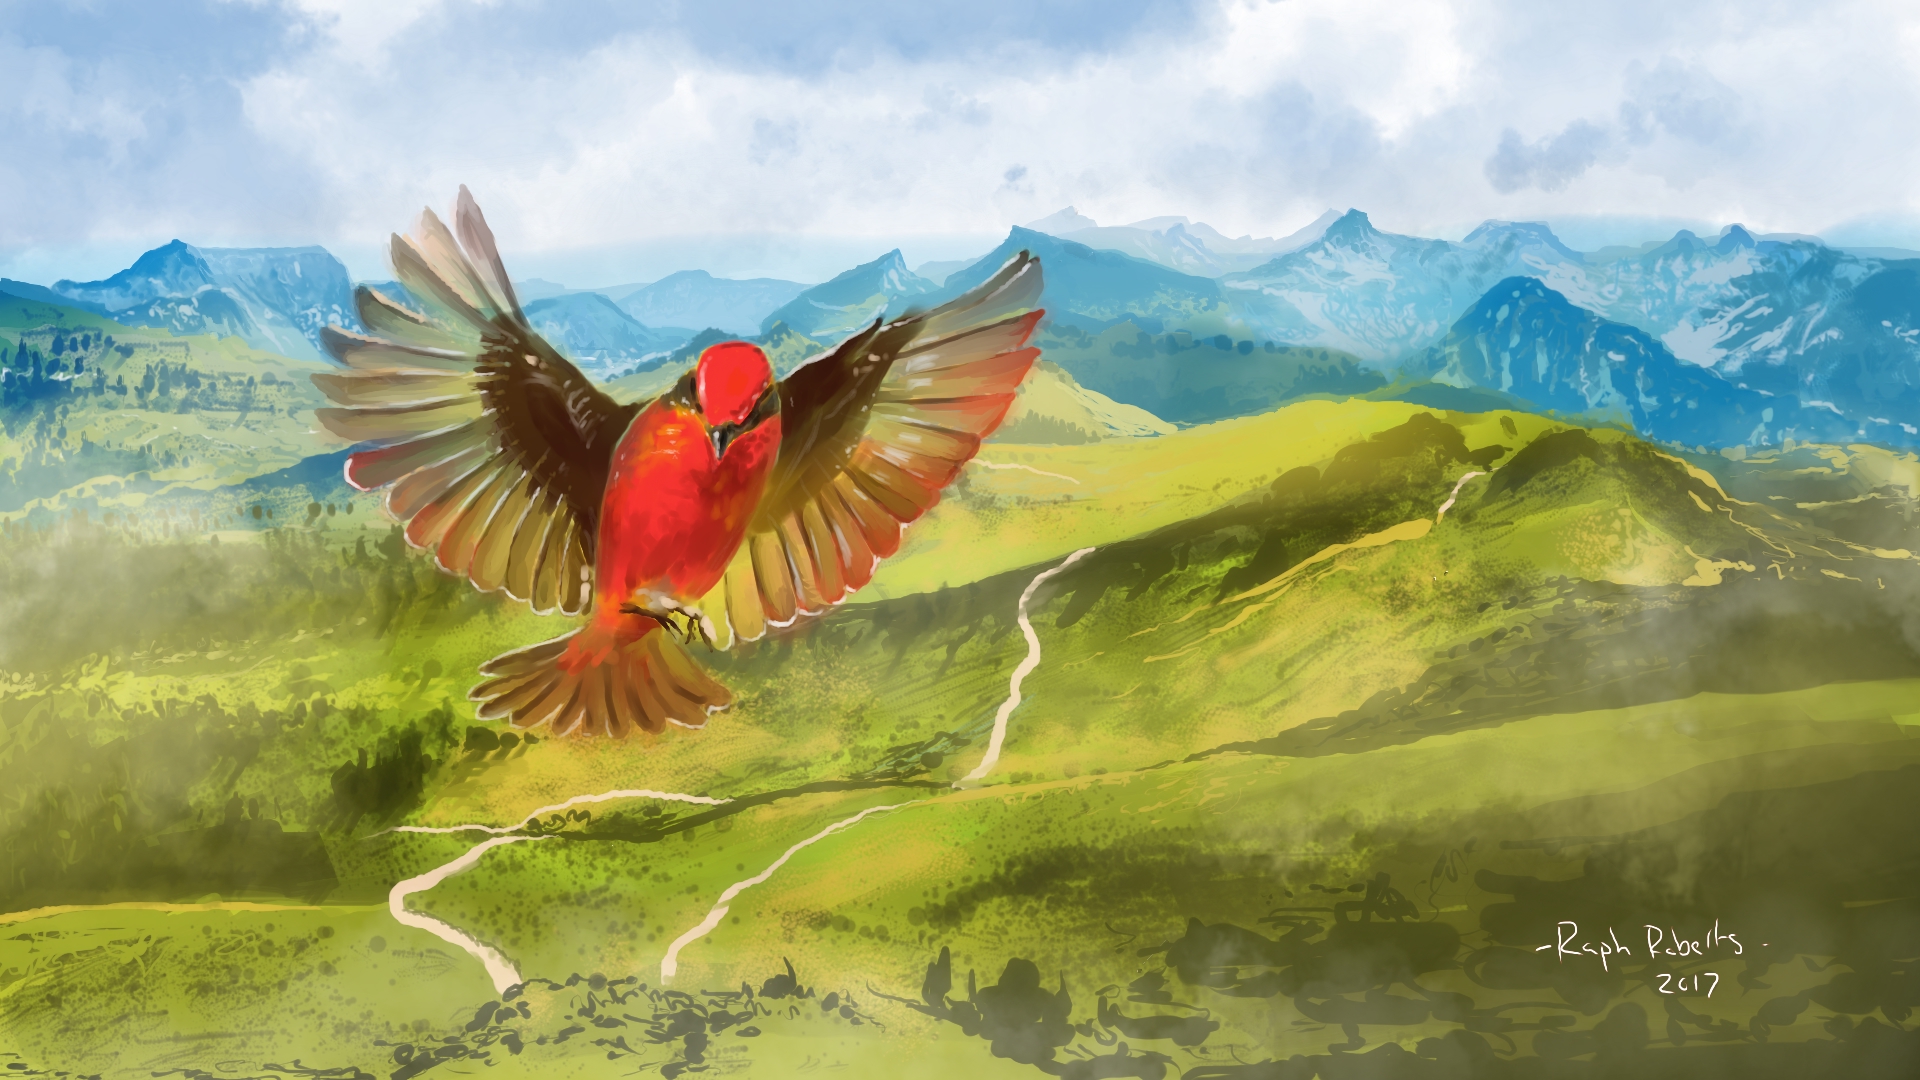 A painting of a red bird